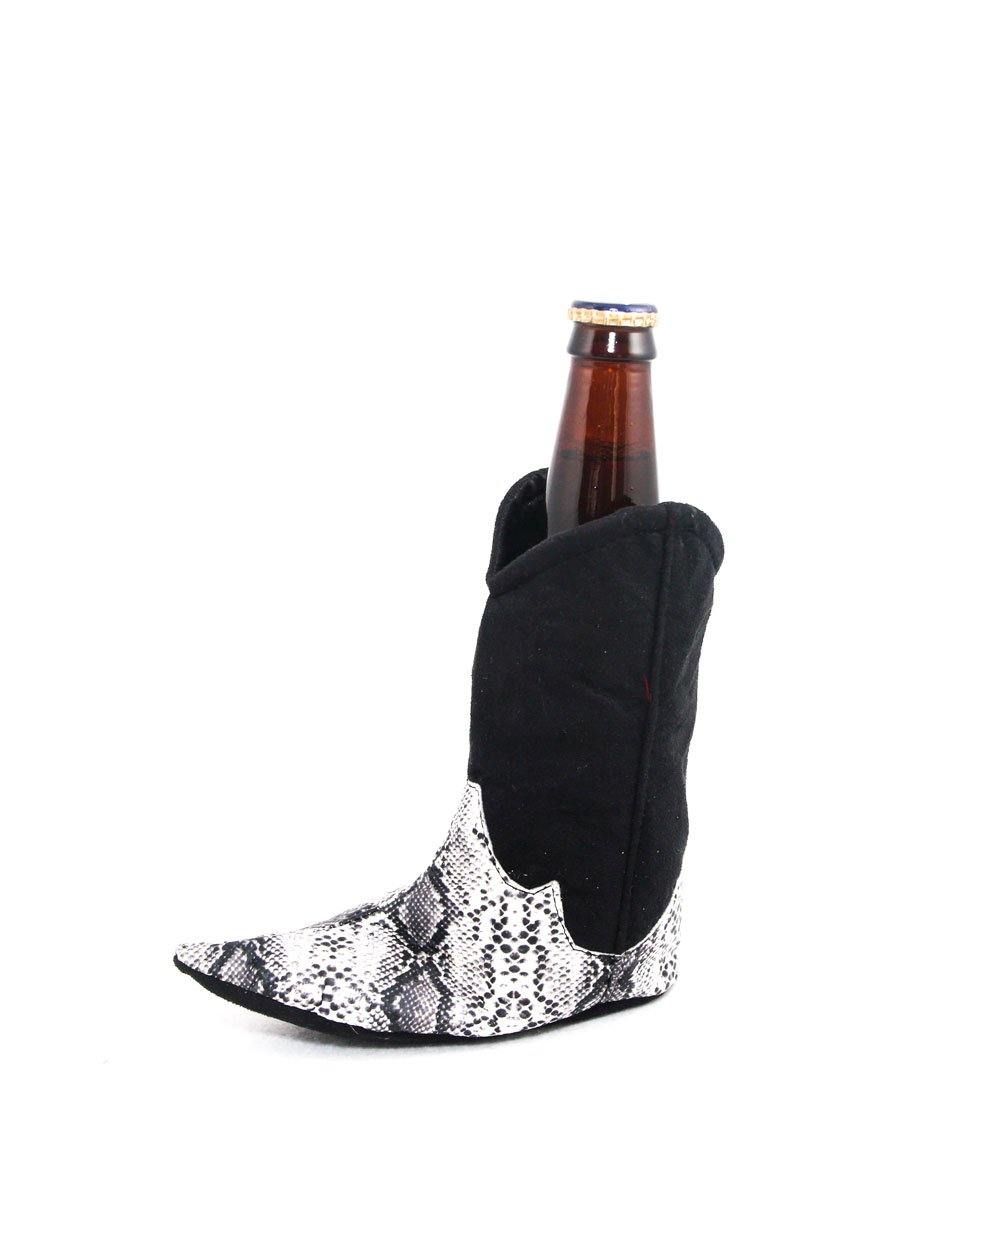 Boot Shaped Coolie for Beer and Water Bottles by Tipsy Totes